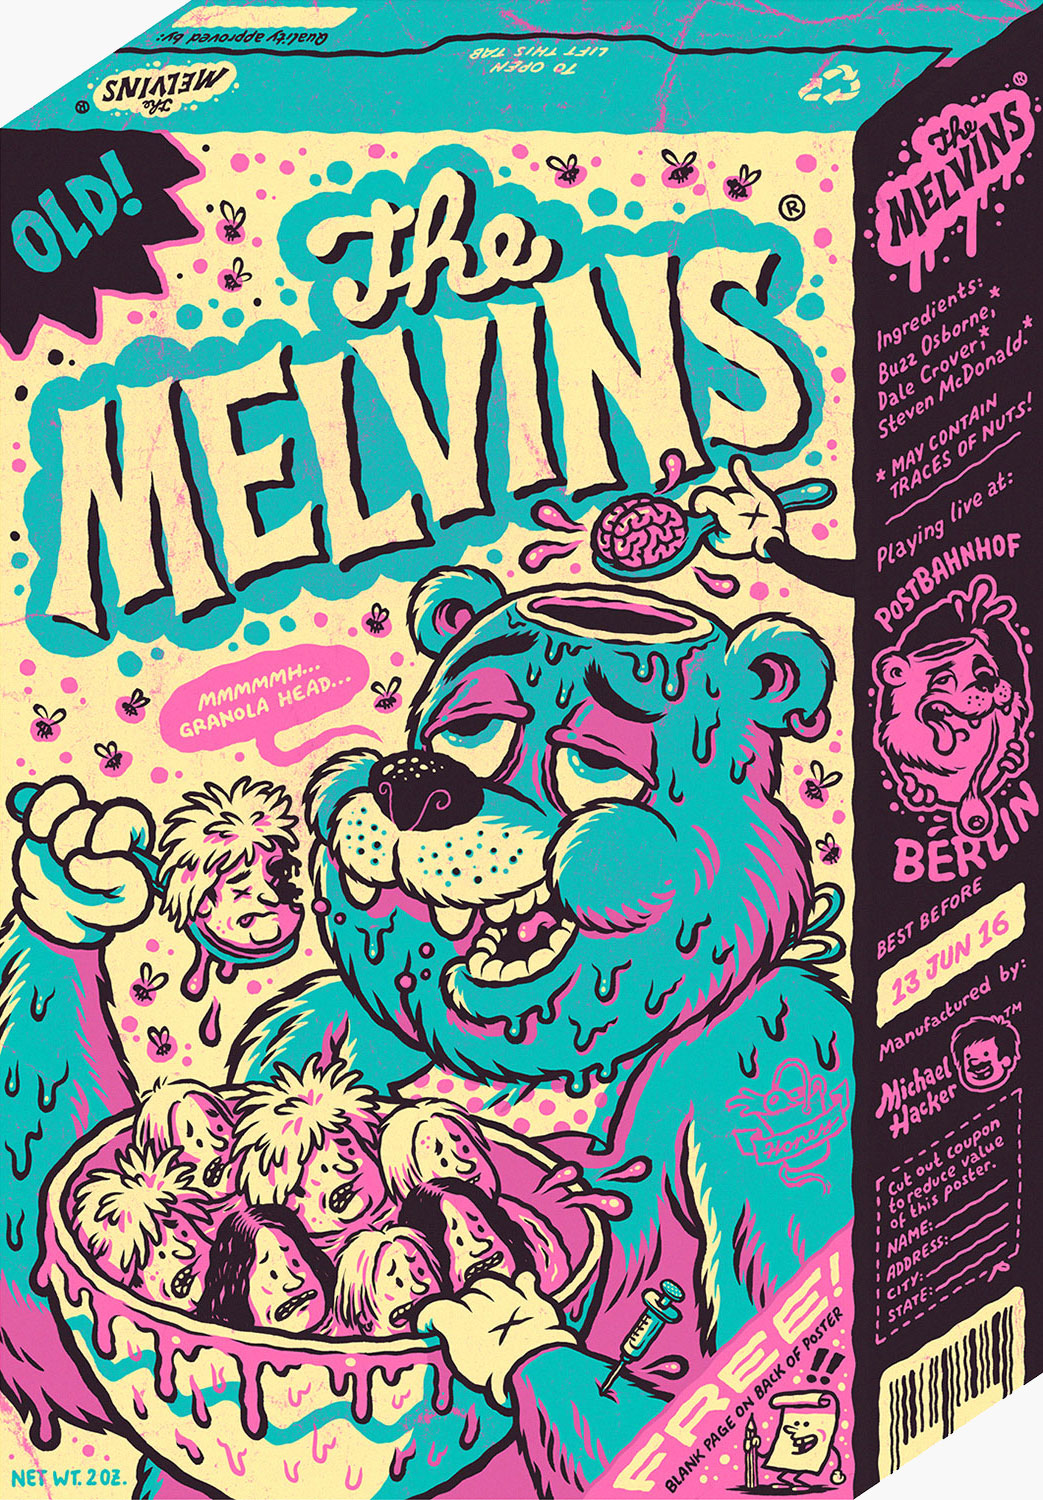 Melvins Berlin cereal box shaped gig poster by Michael Hacker